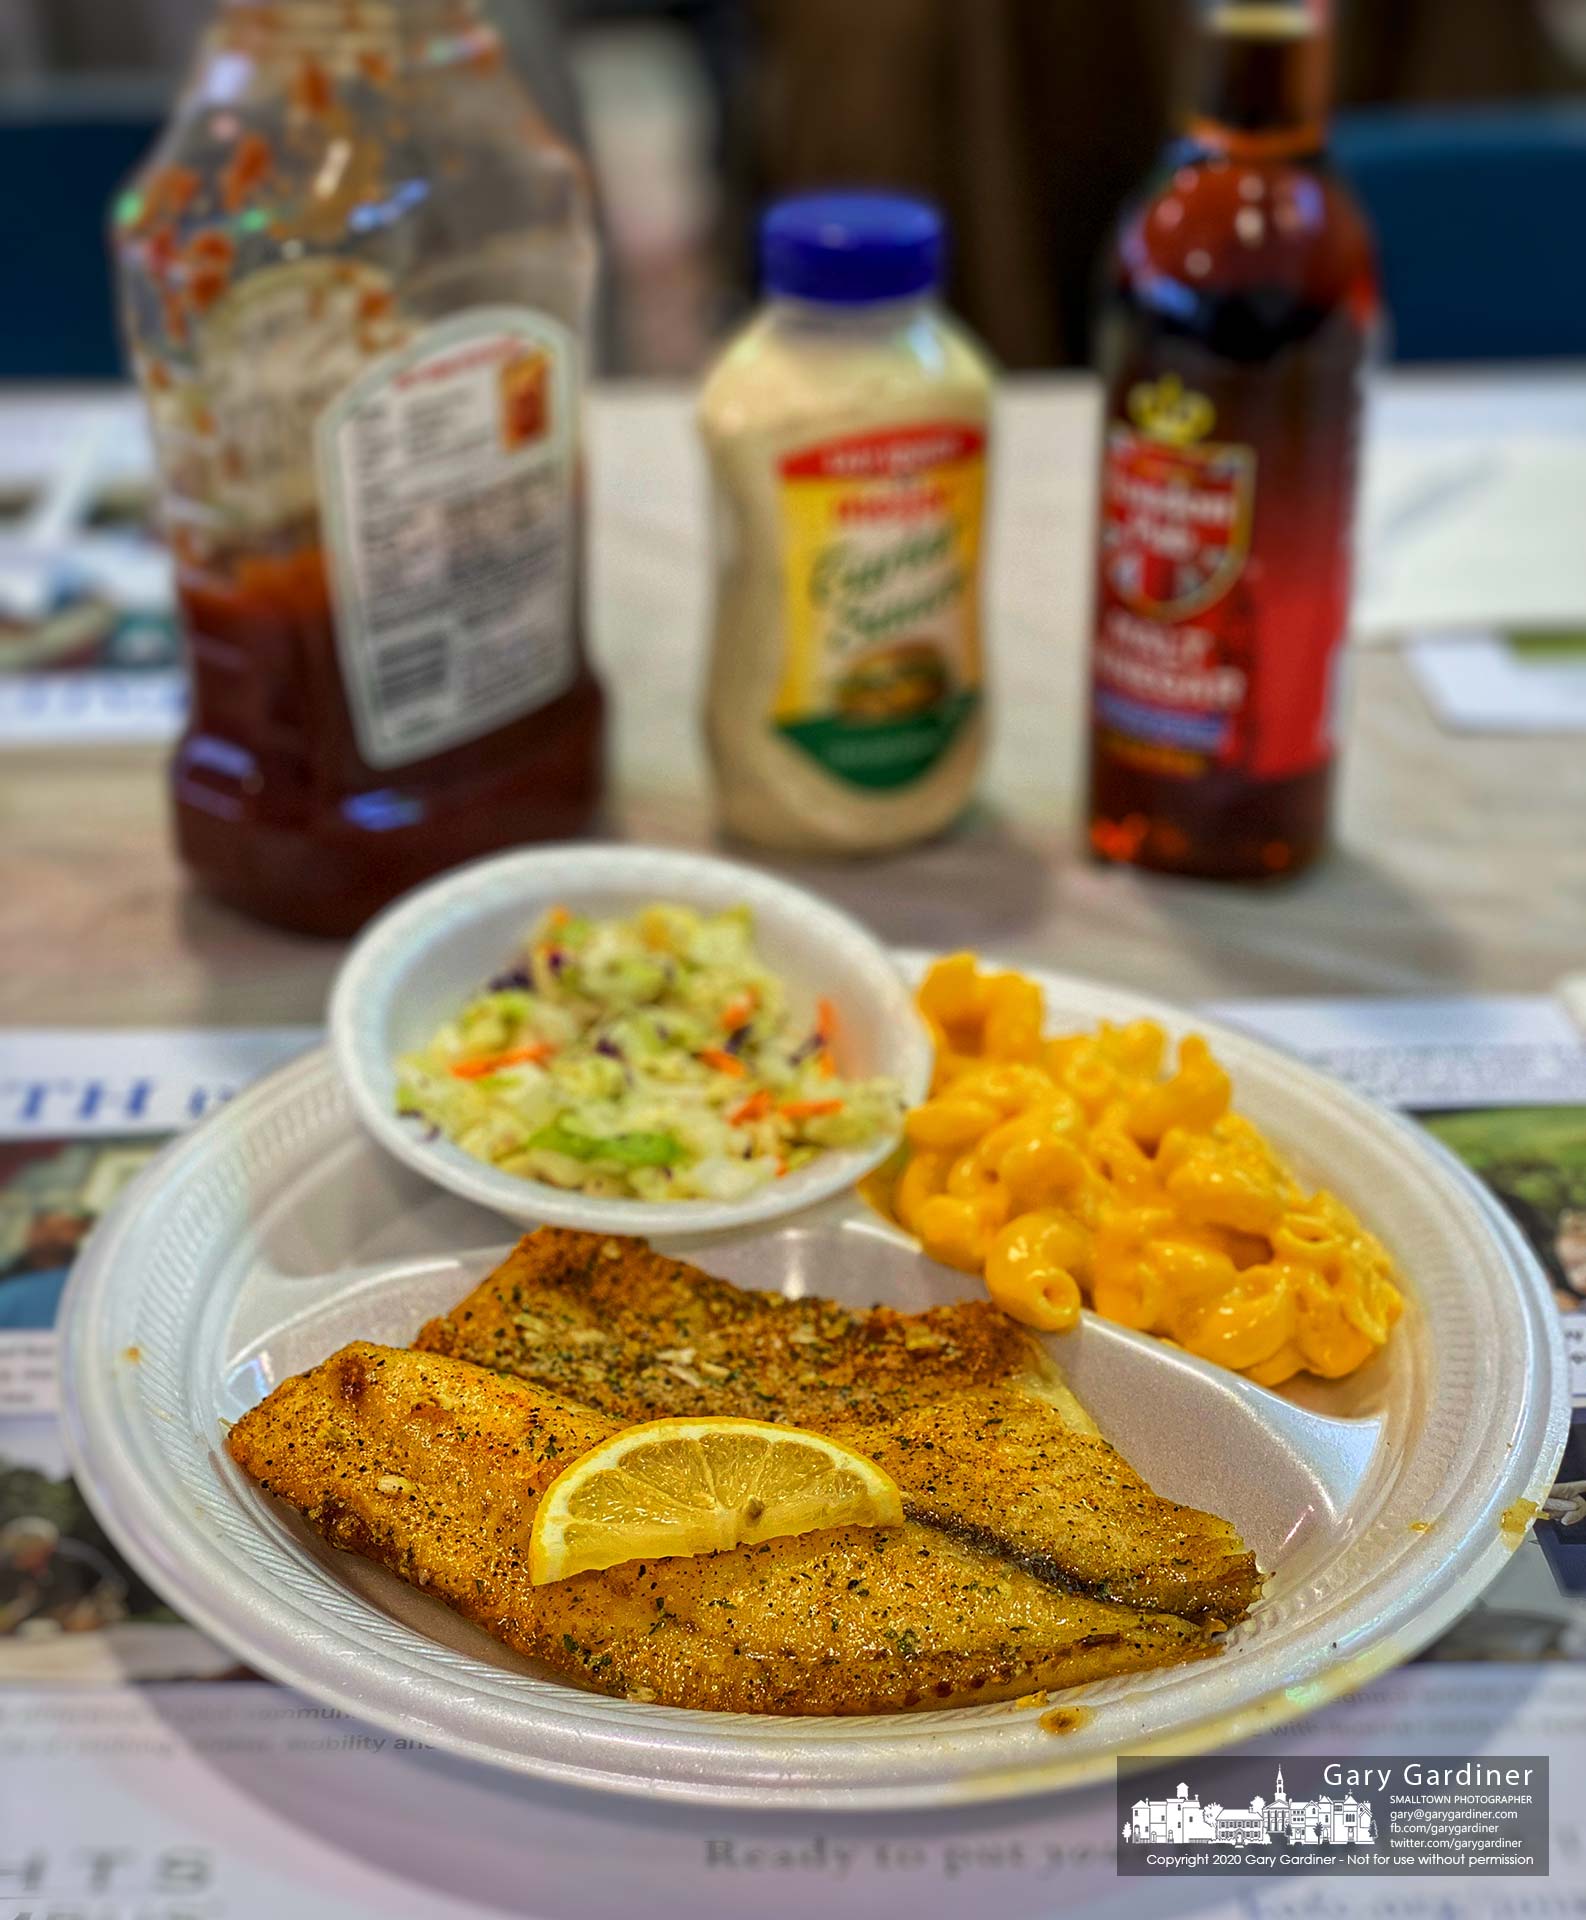 Baked Tilapia with lemon was one of the choices for the first Lenten fish fry of the season at St. Paul the Apostle Catholic Church. My Final Photo for  Feb. 28, 2020.